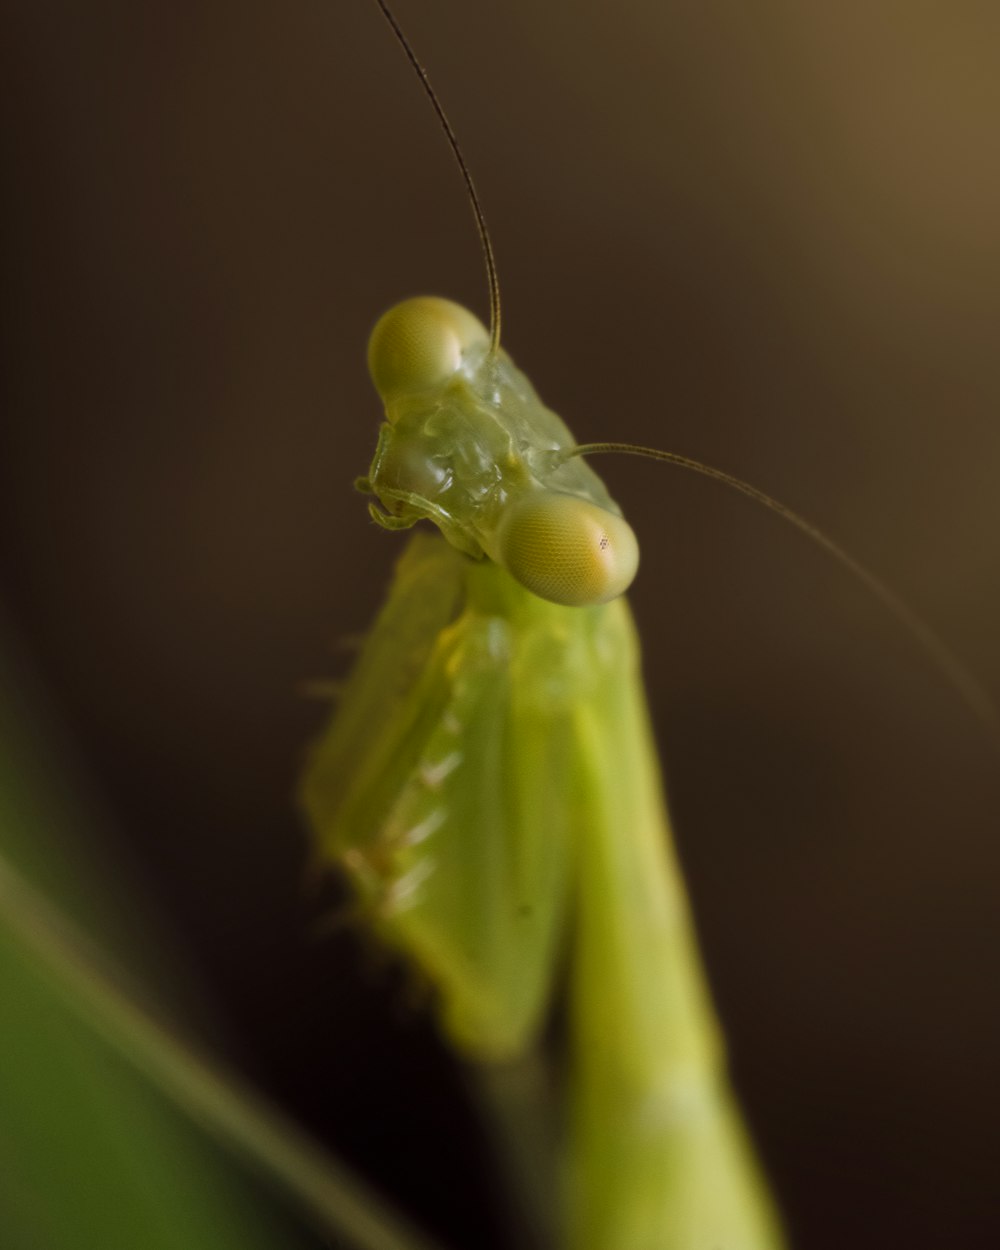 a close up of a grasshopper on a plant